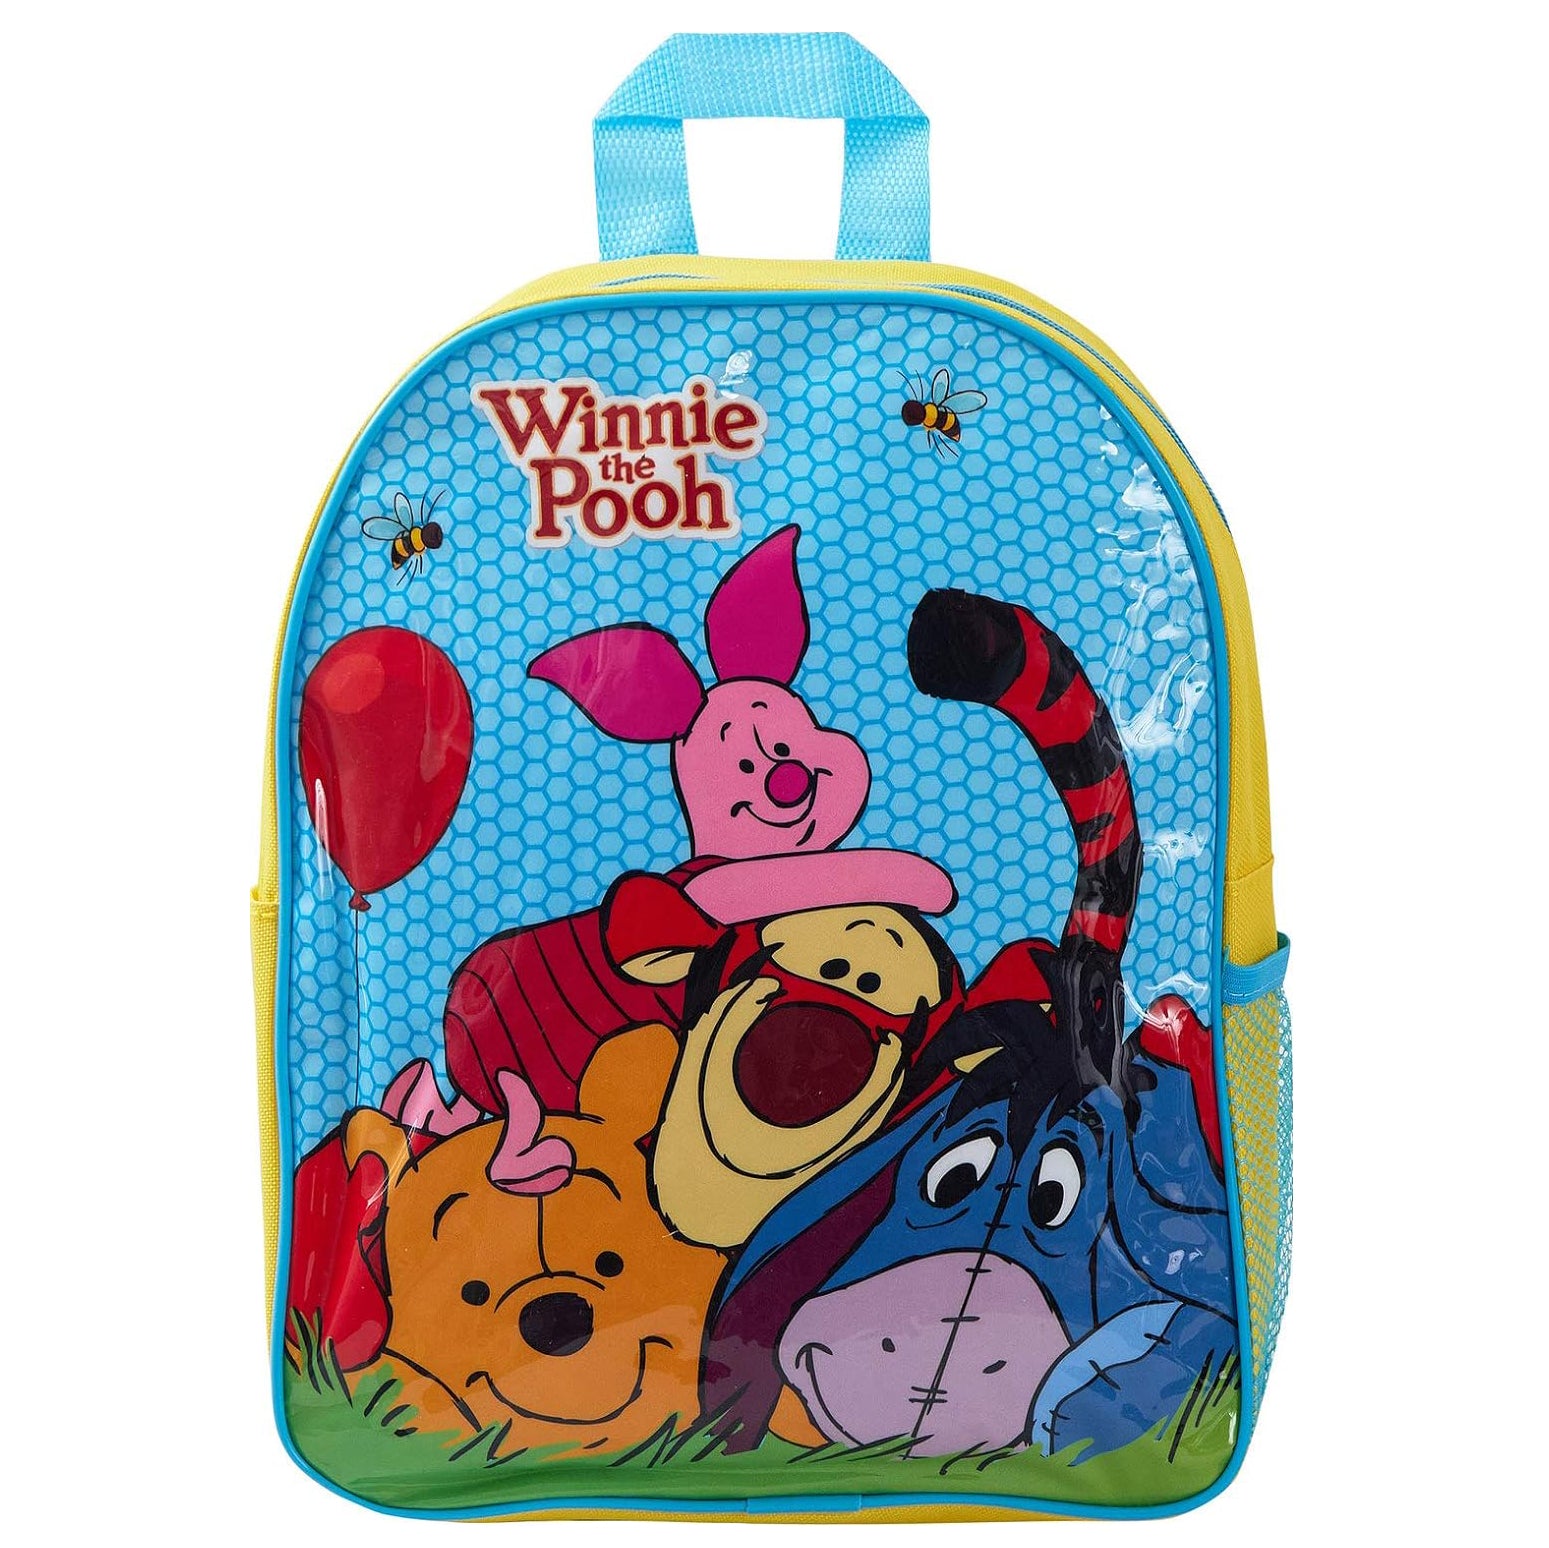 Winnie the Pooh Canvas Backpack